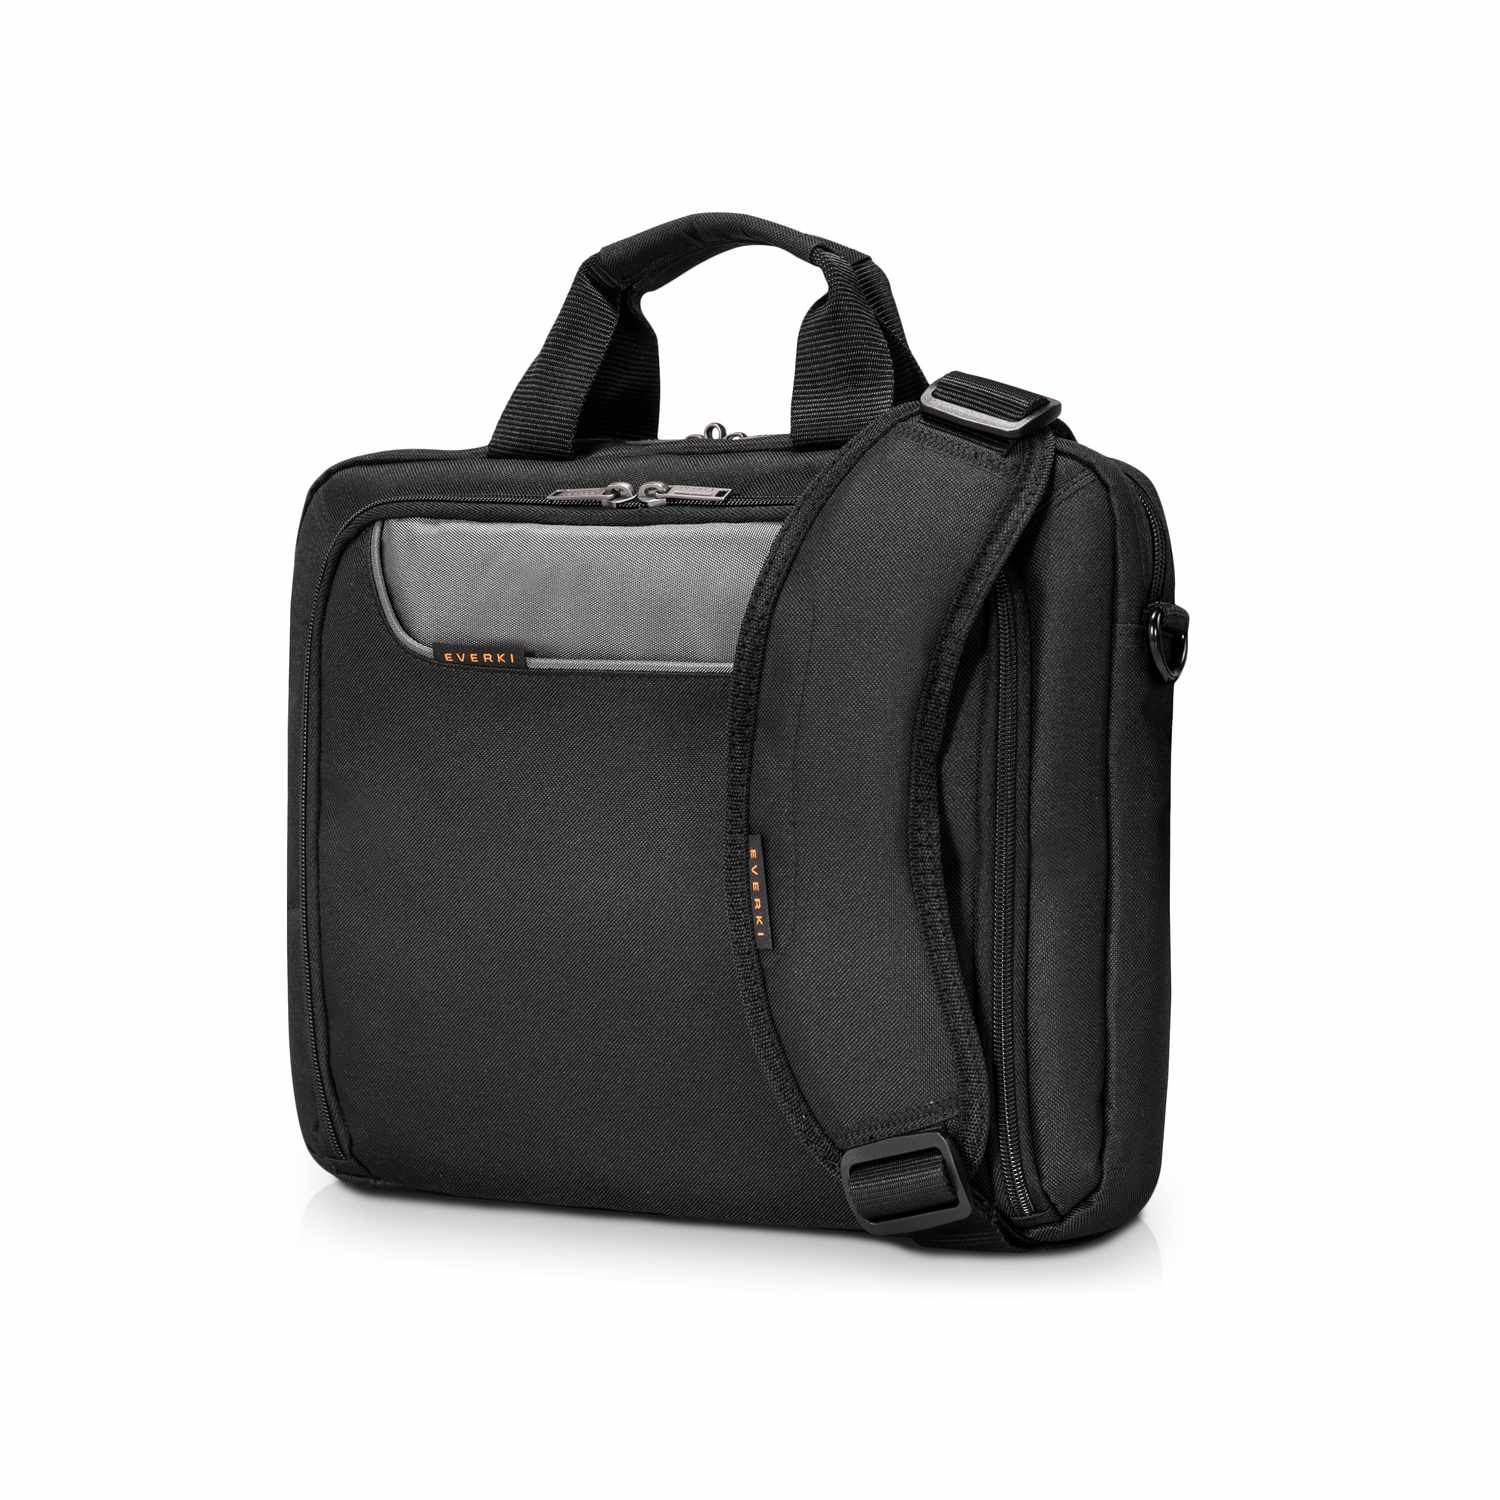 Advance ECO case for computers and tablets up to 14 inches